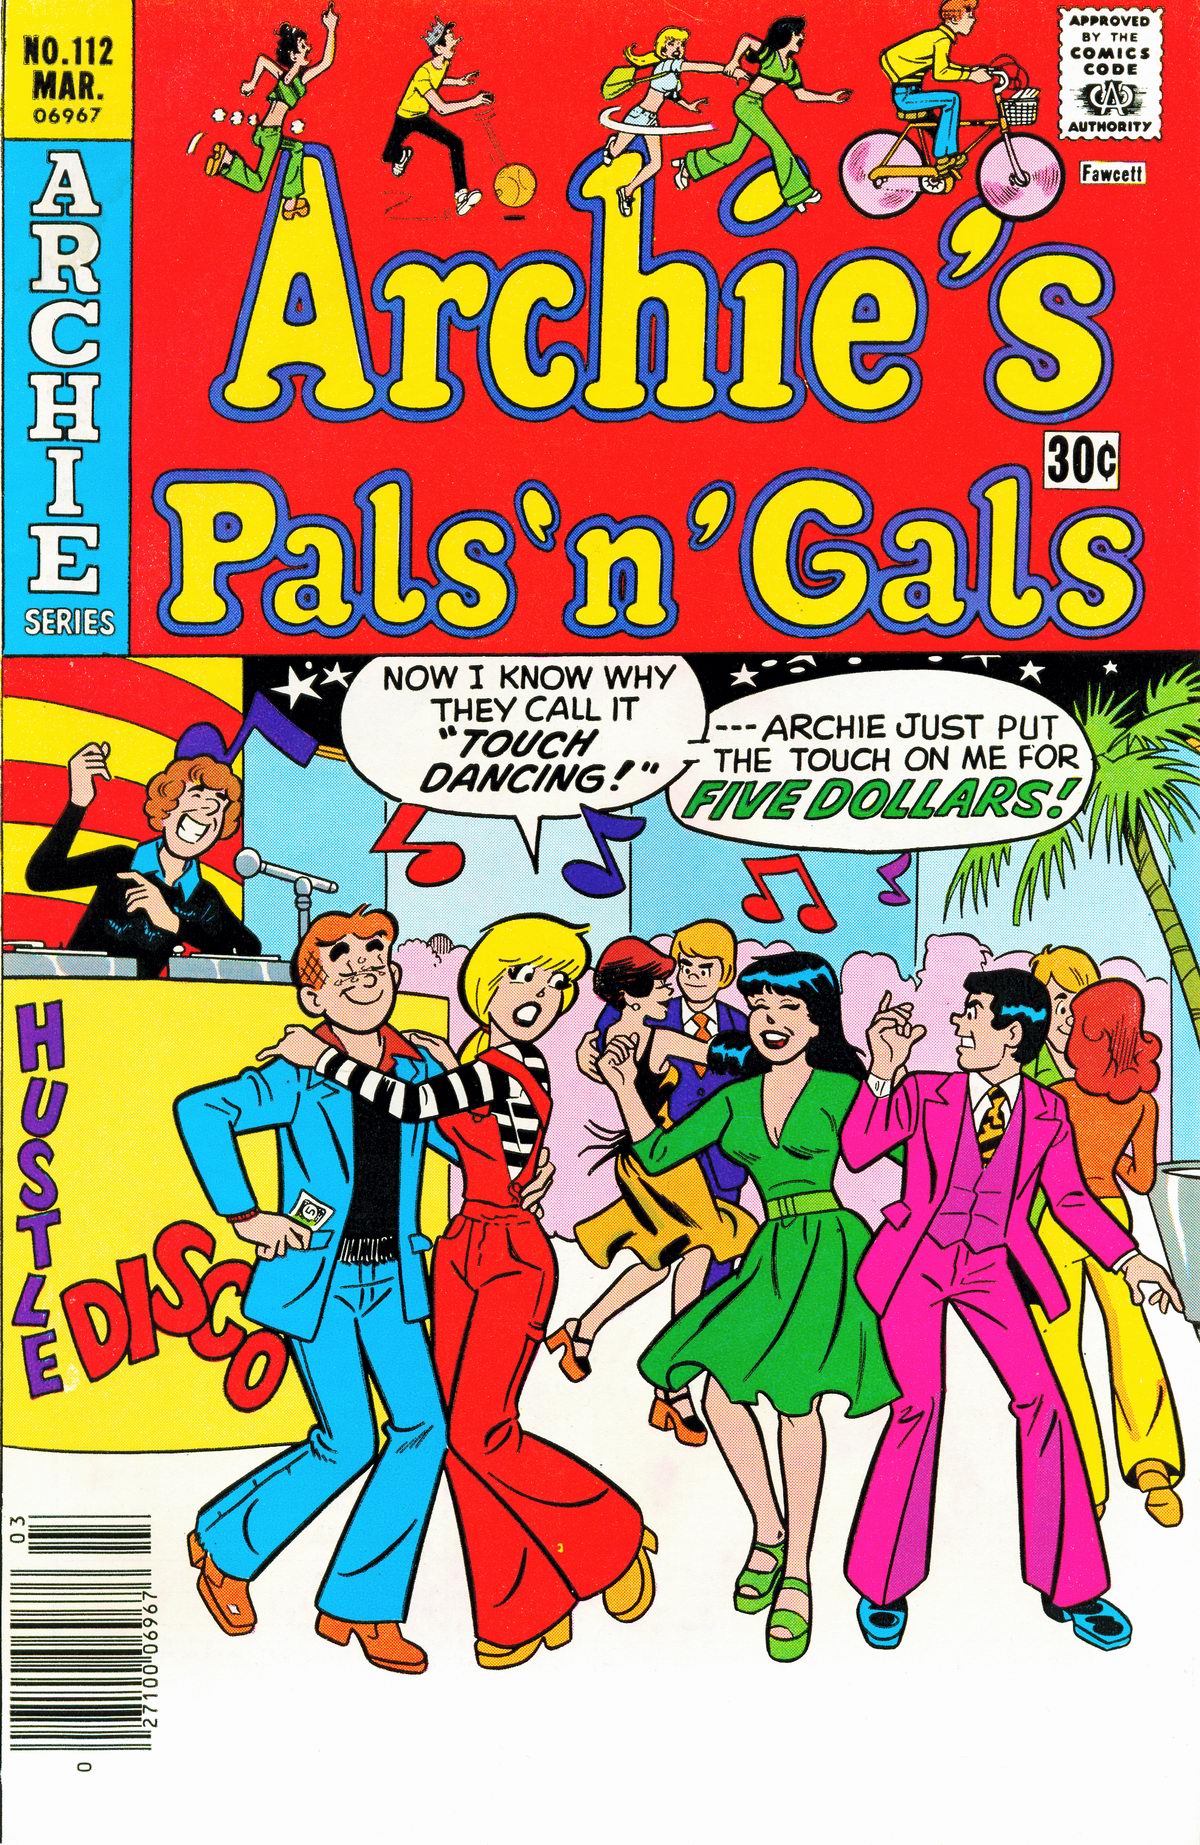 Read online Archie's Pals 'N' Gals (1952) comic -  Issue #112 - 1